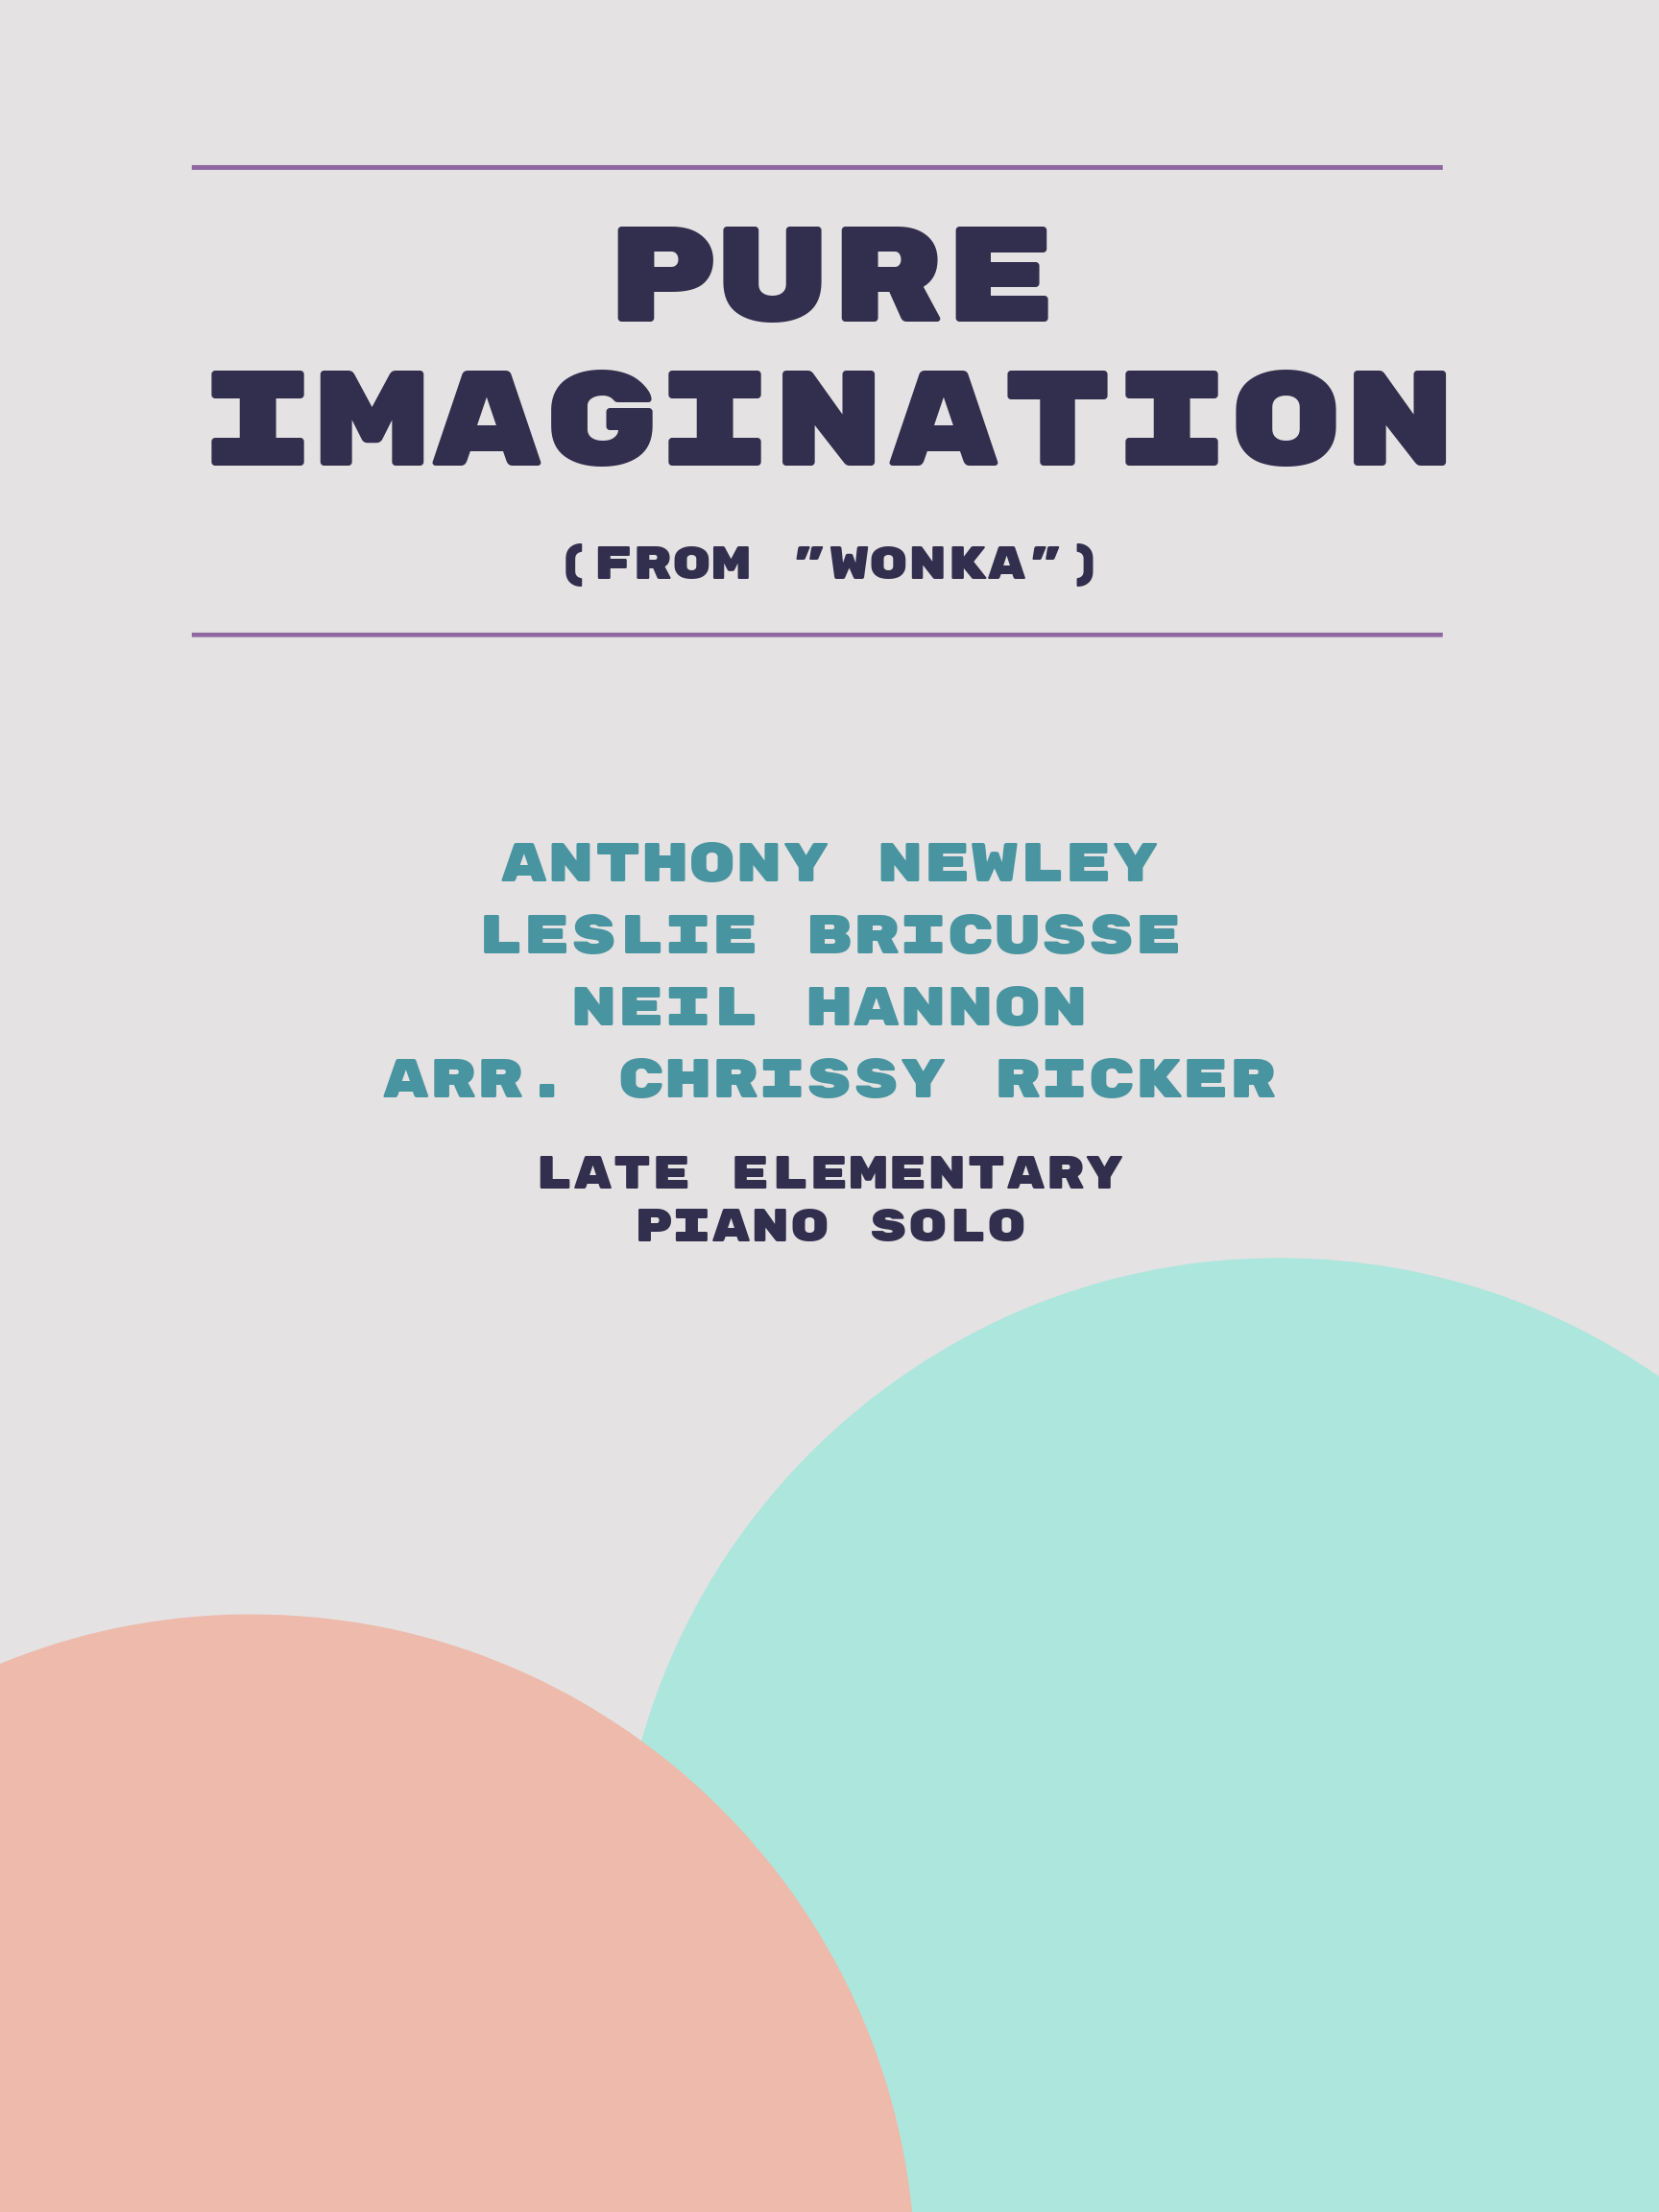 Pure Imagination by Anthony Newley, Leslie Bricusse, Neil Hannon